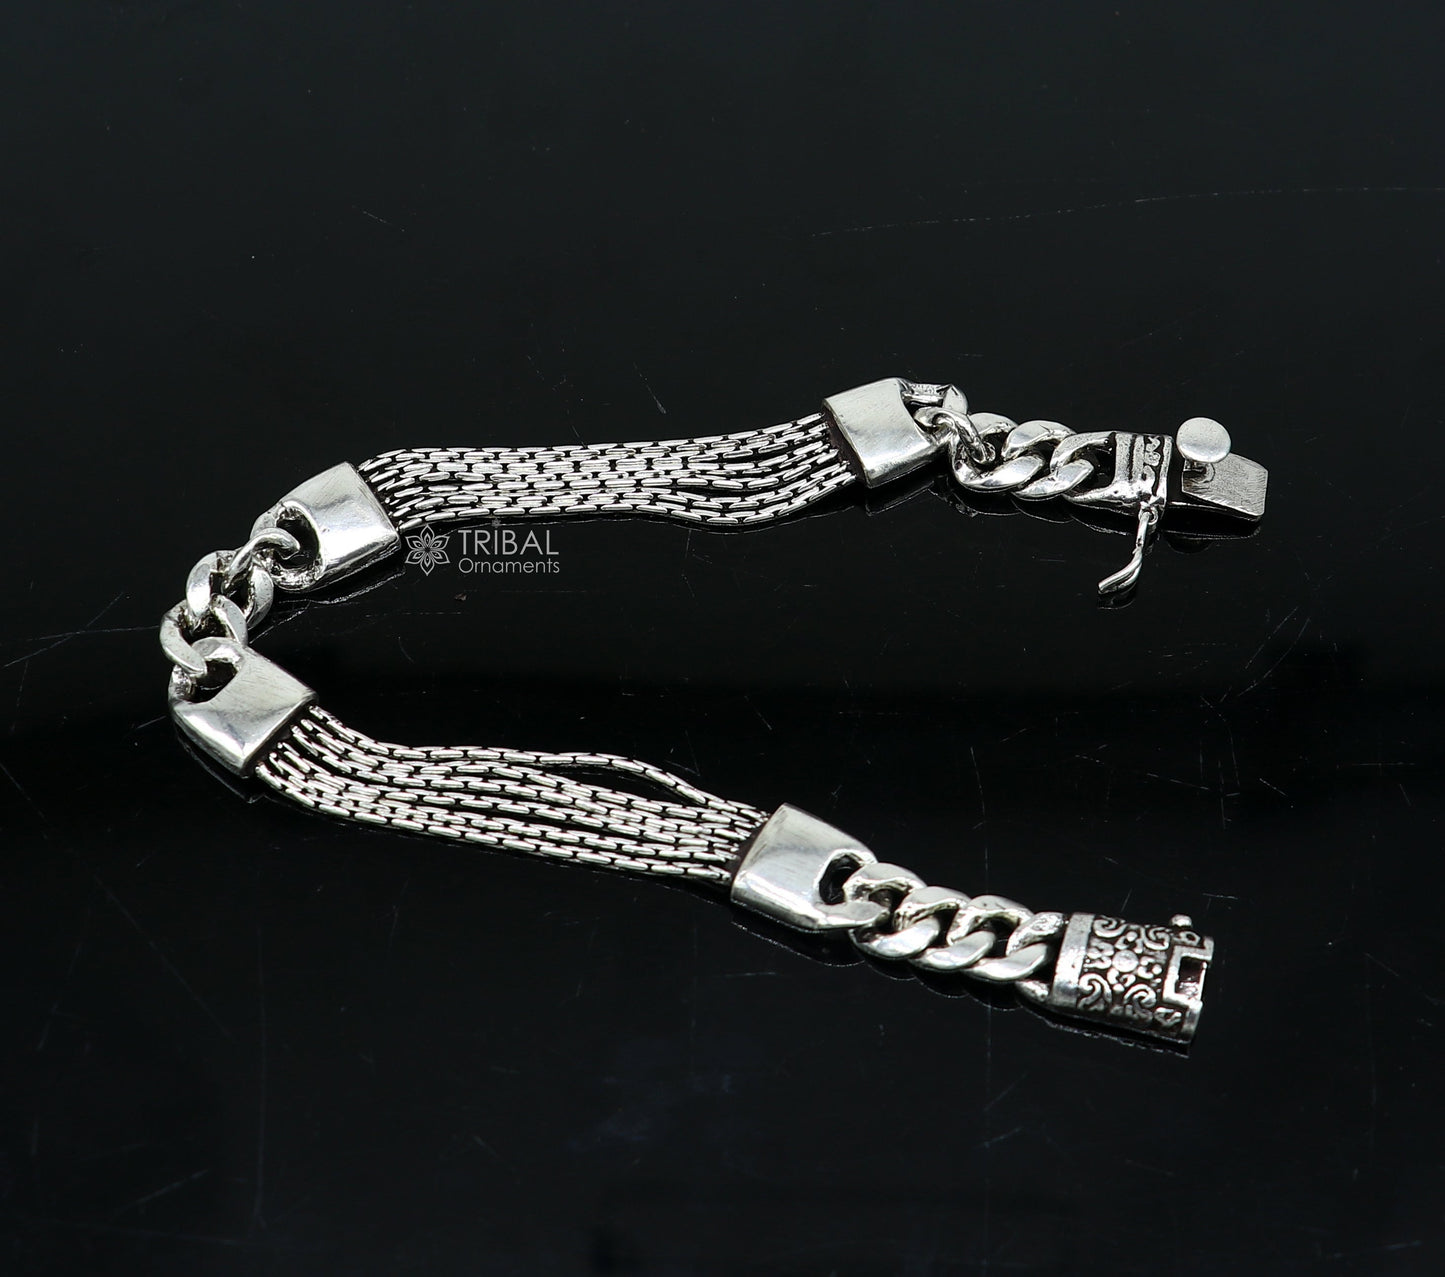 8" long 925 sterling silver handmade gorgeous solid chain flexible customized bracelet unisex personalized gift exclusive jewelry SBR691 - TRIBAL ORNAMENTS